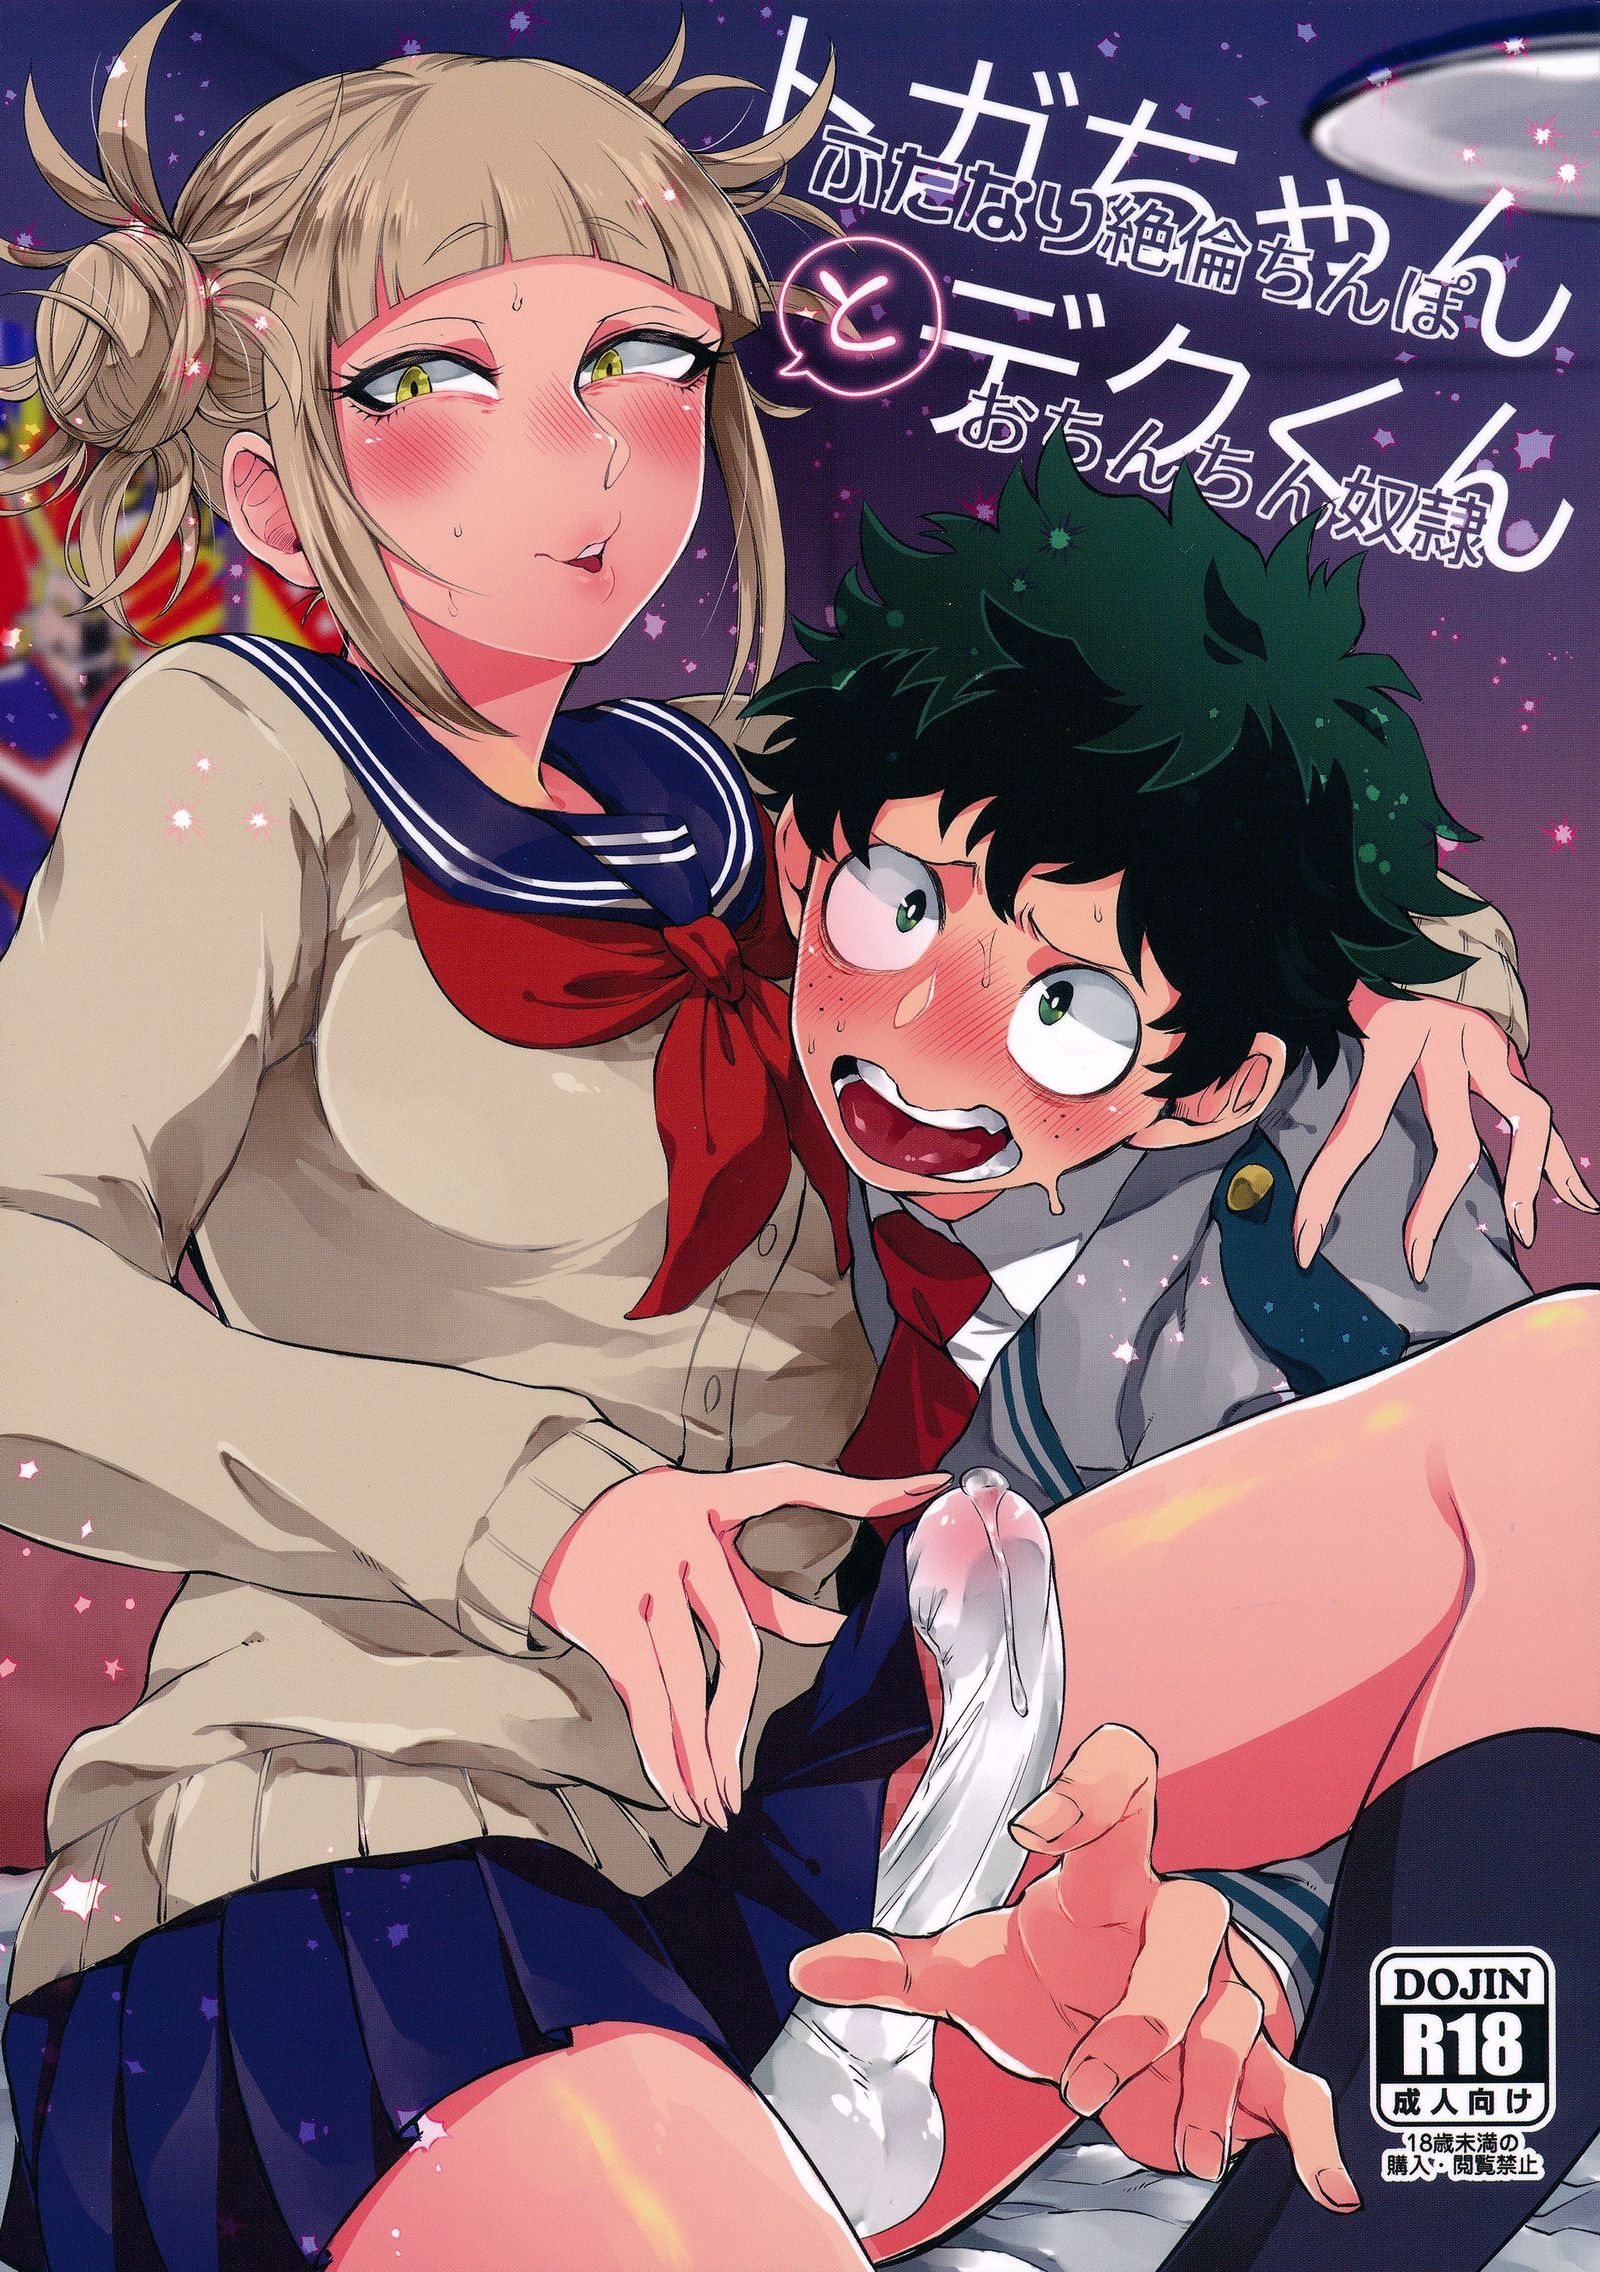 Sexy Toga - himiko toga - sorted by number of objects - Free Hentai